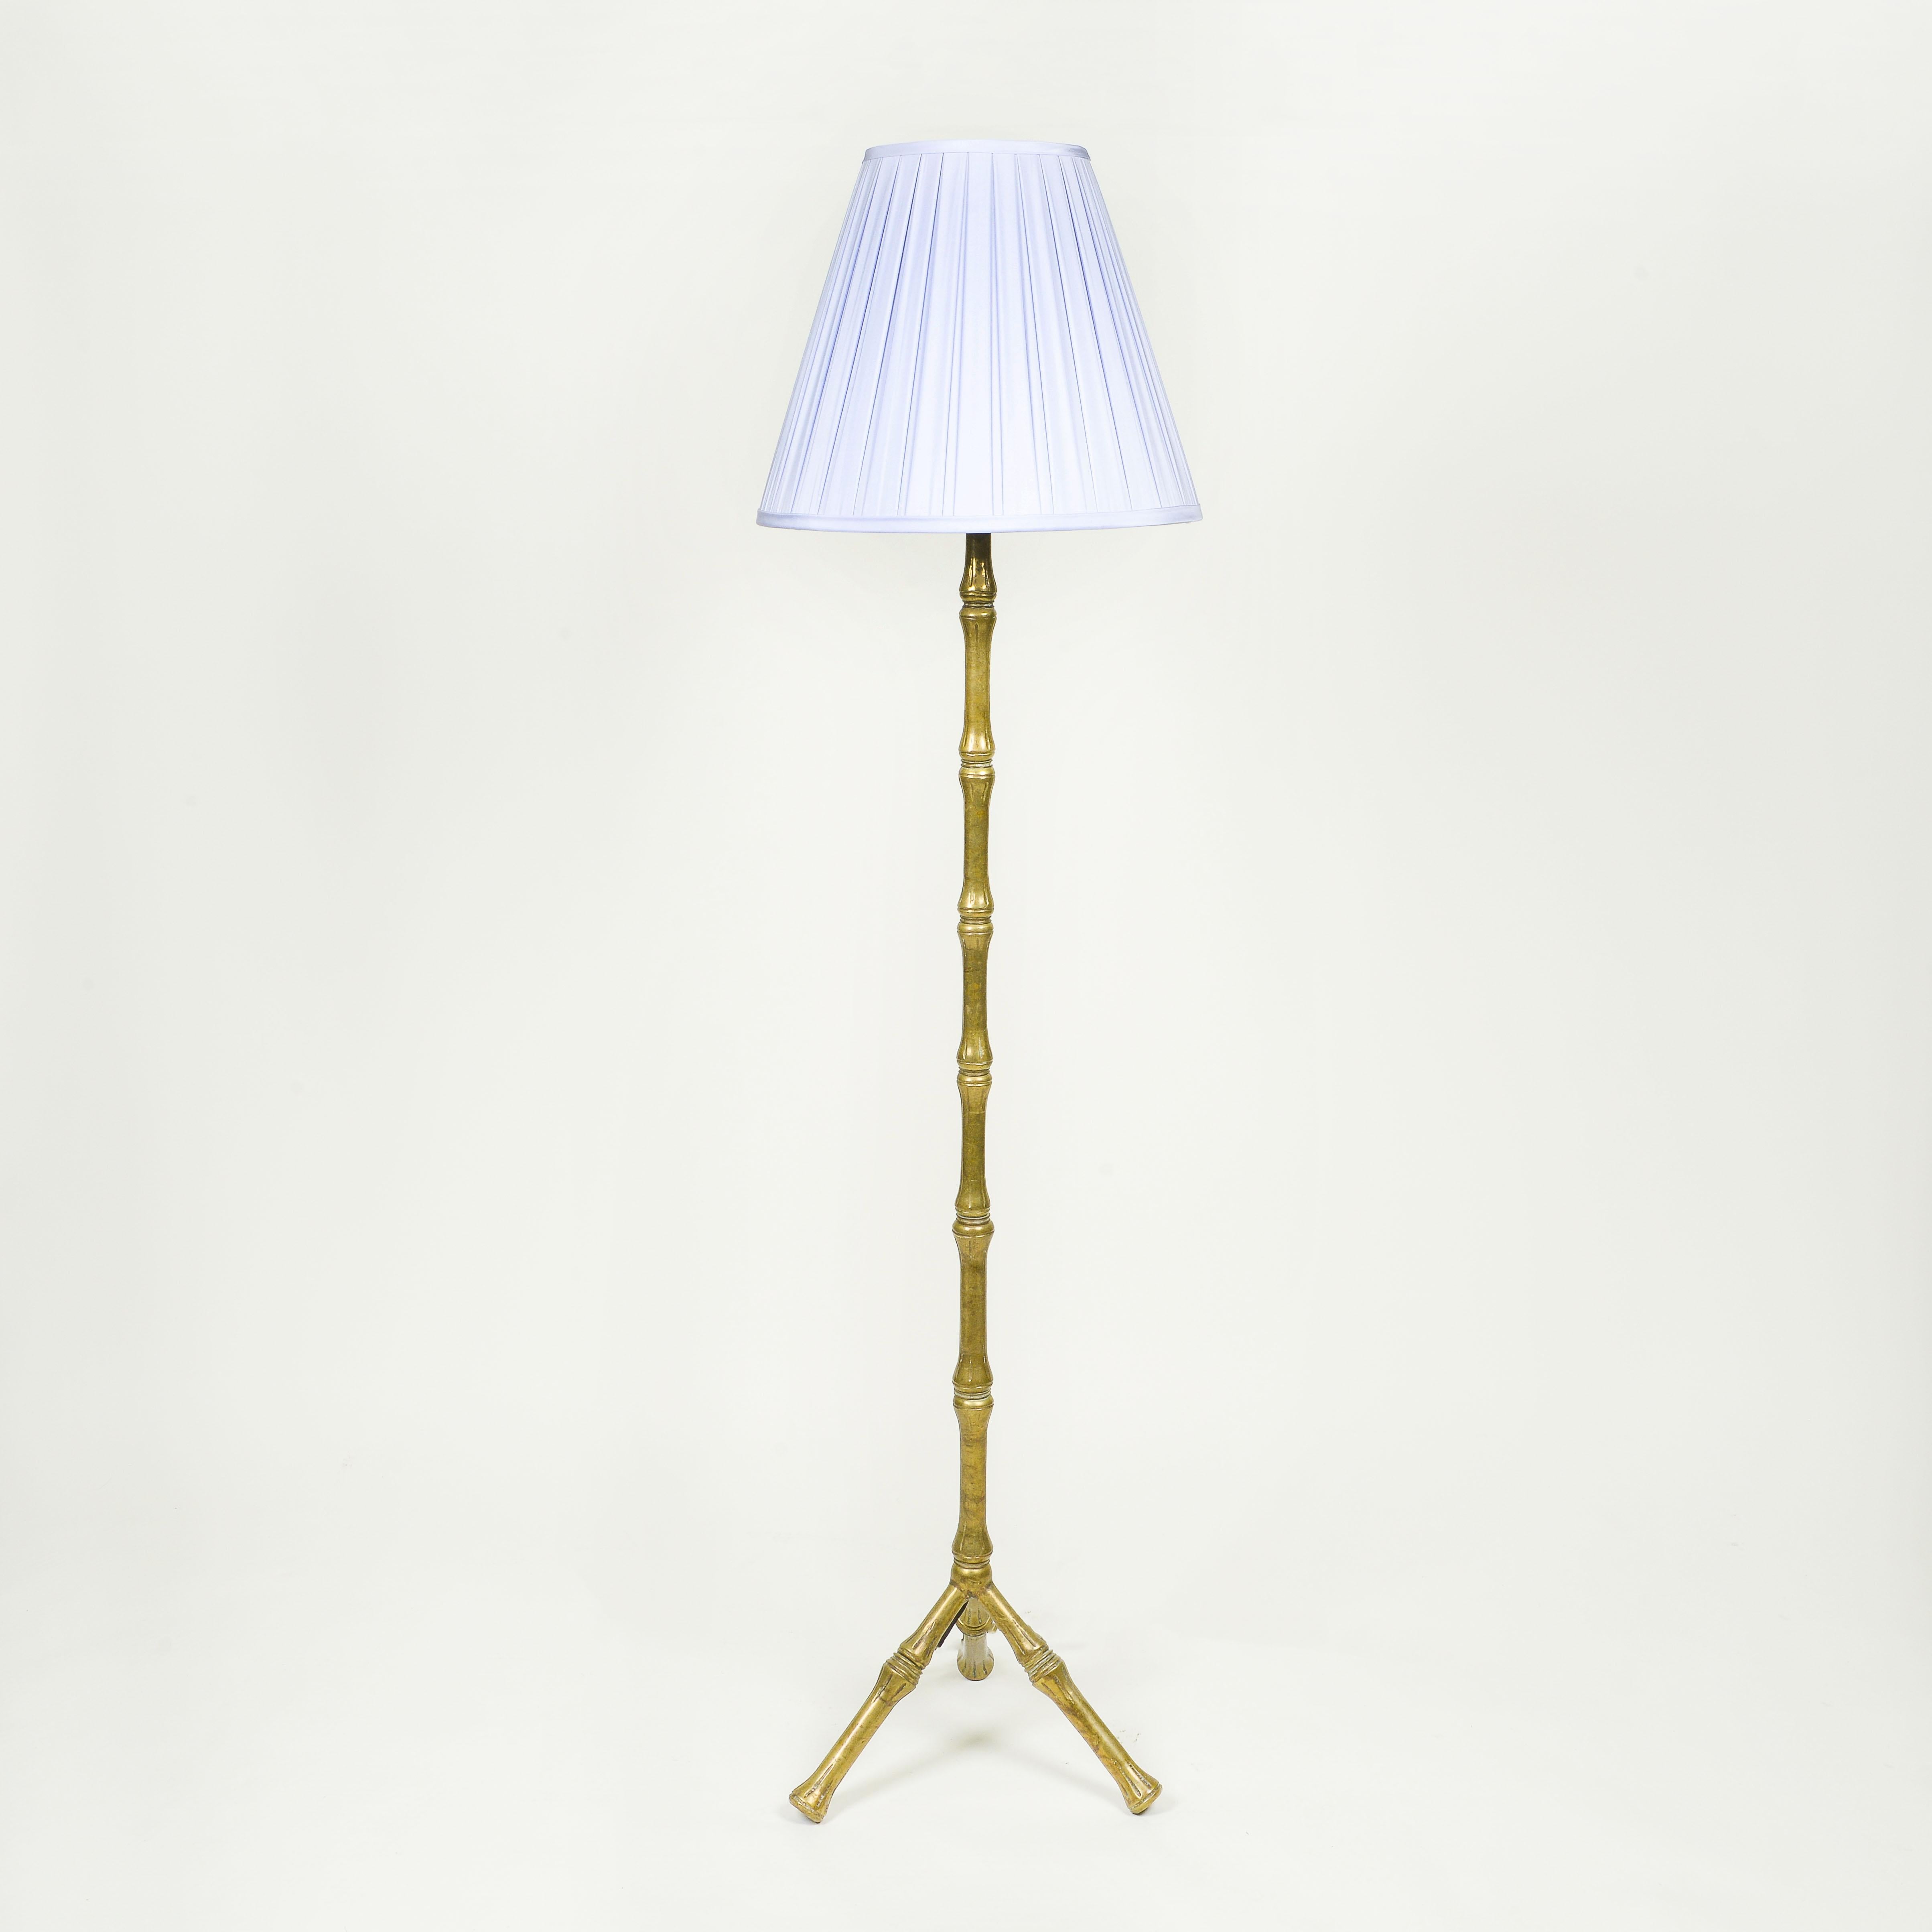 A mid-century French bronze faux bamboo floor lamp featuring a central stem and tripod base.